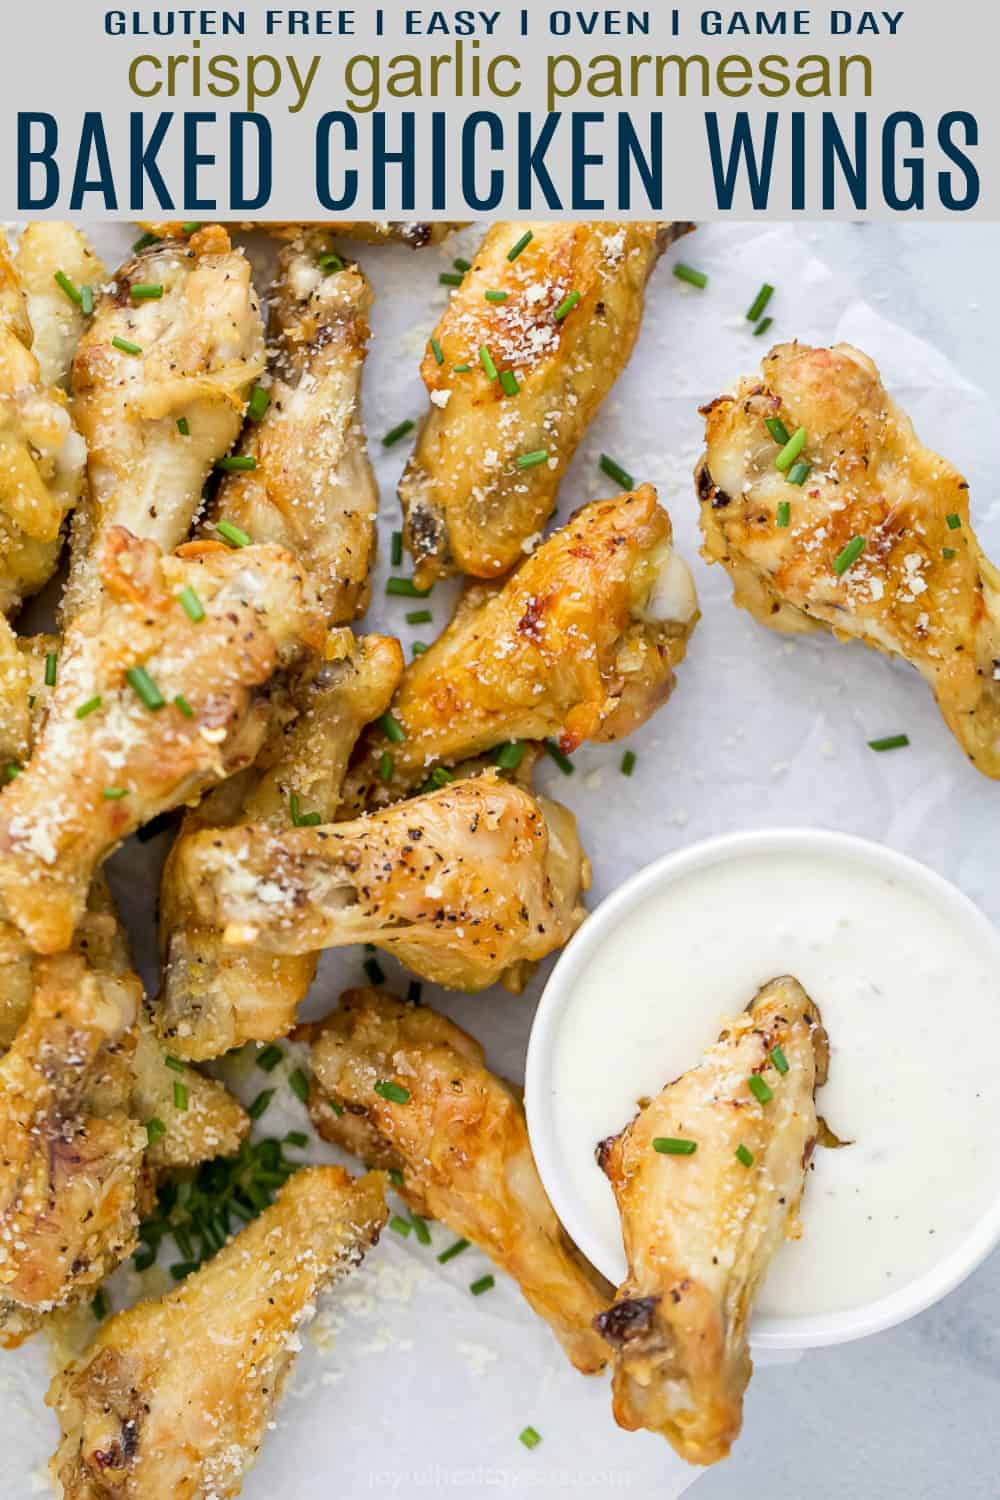 Crispy baked garlic parmesan chicken wings with a cup of creamy dipping sauce